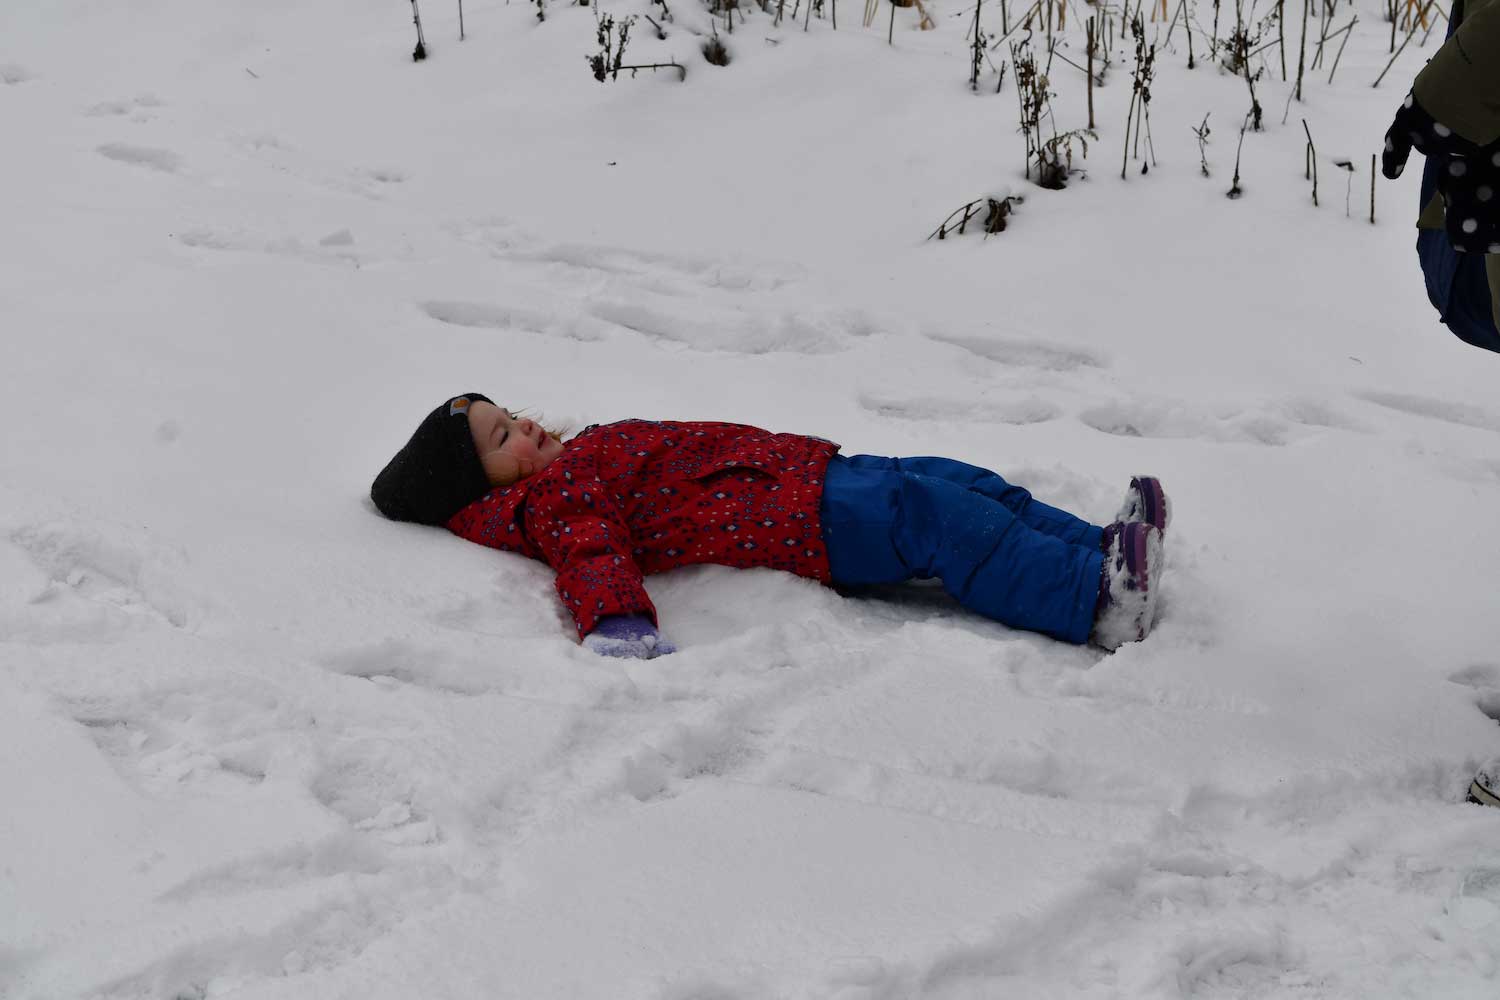 A child laying in the snow in full snow gear.